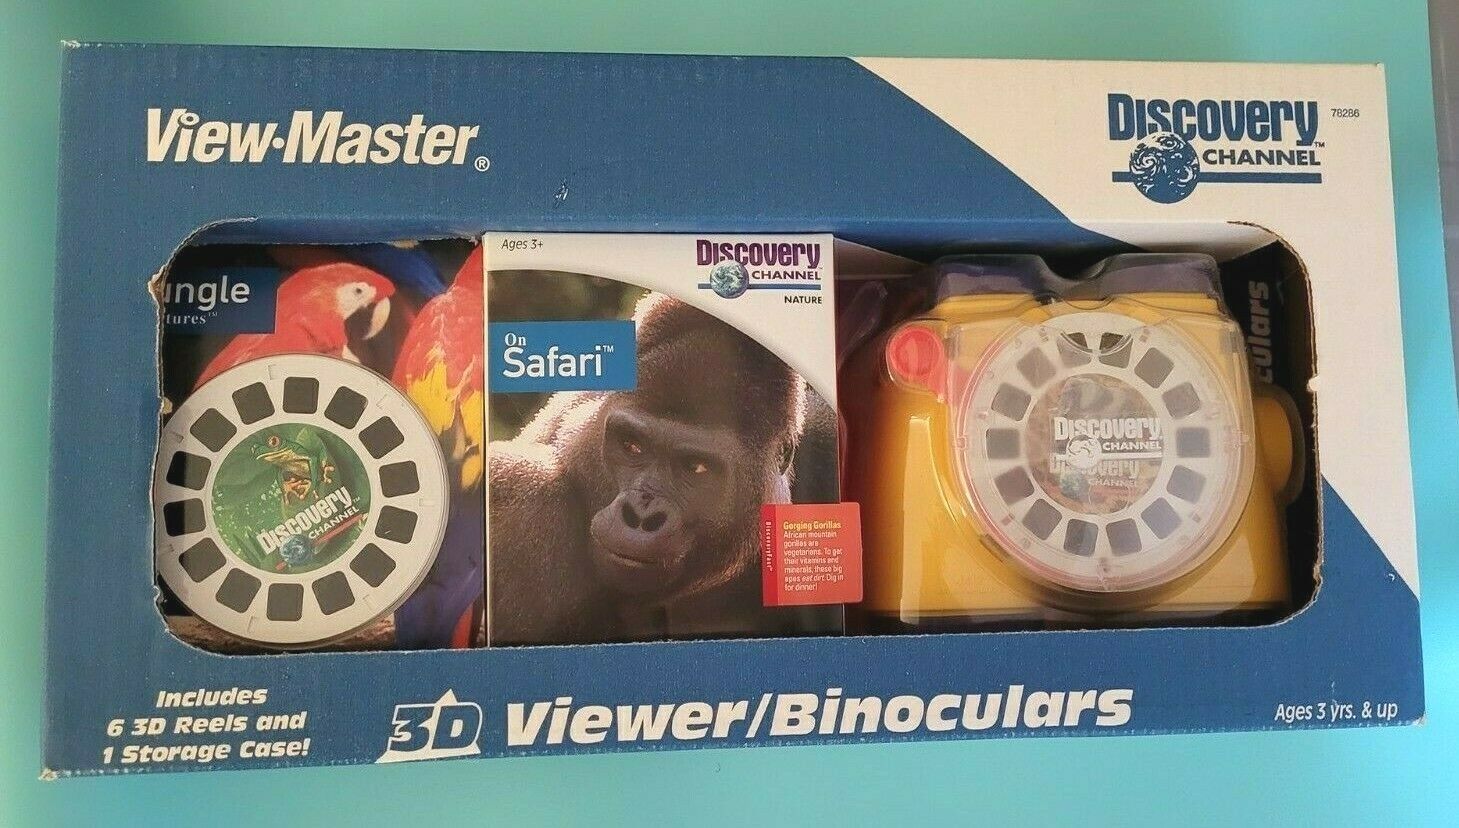 A Sealed Original Discovery Channel Store Giftset view-master Viewer Reels Boxed